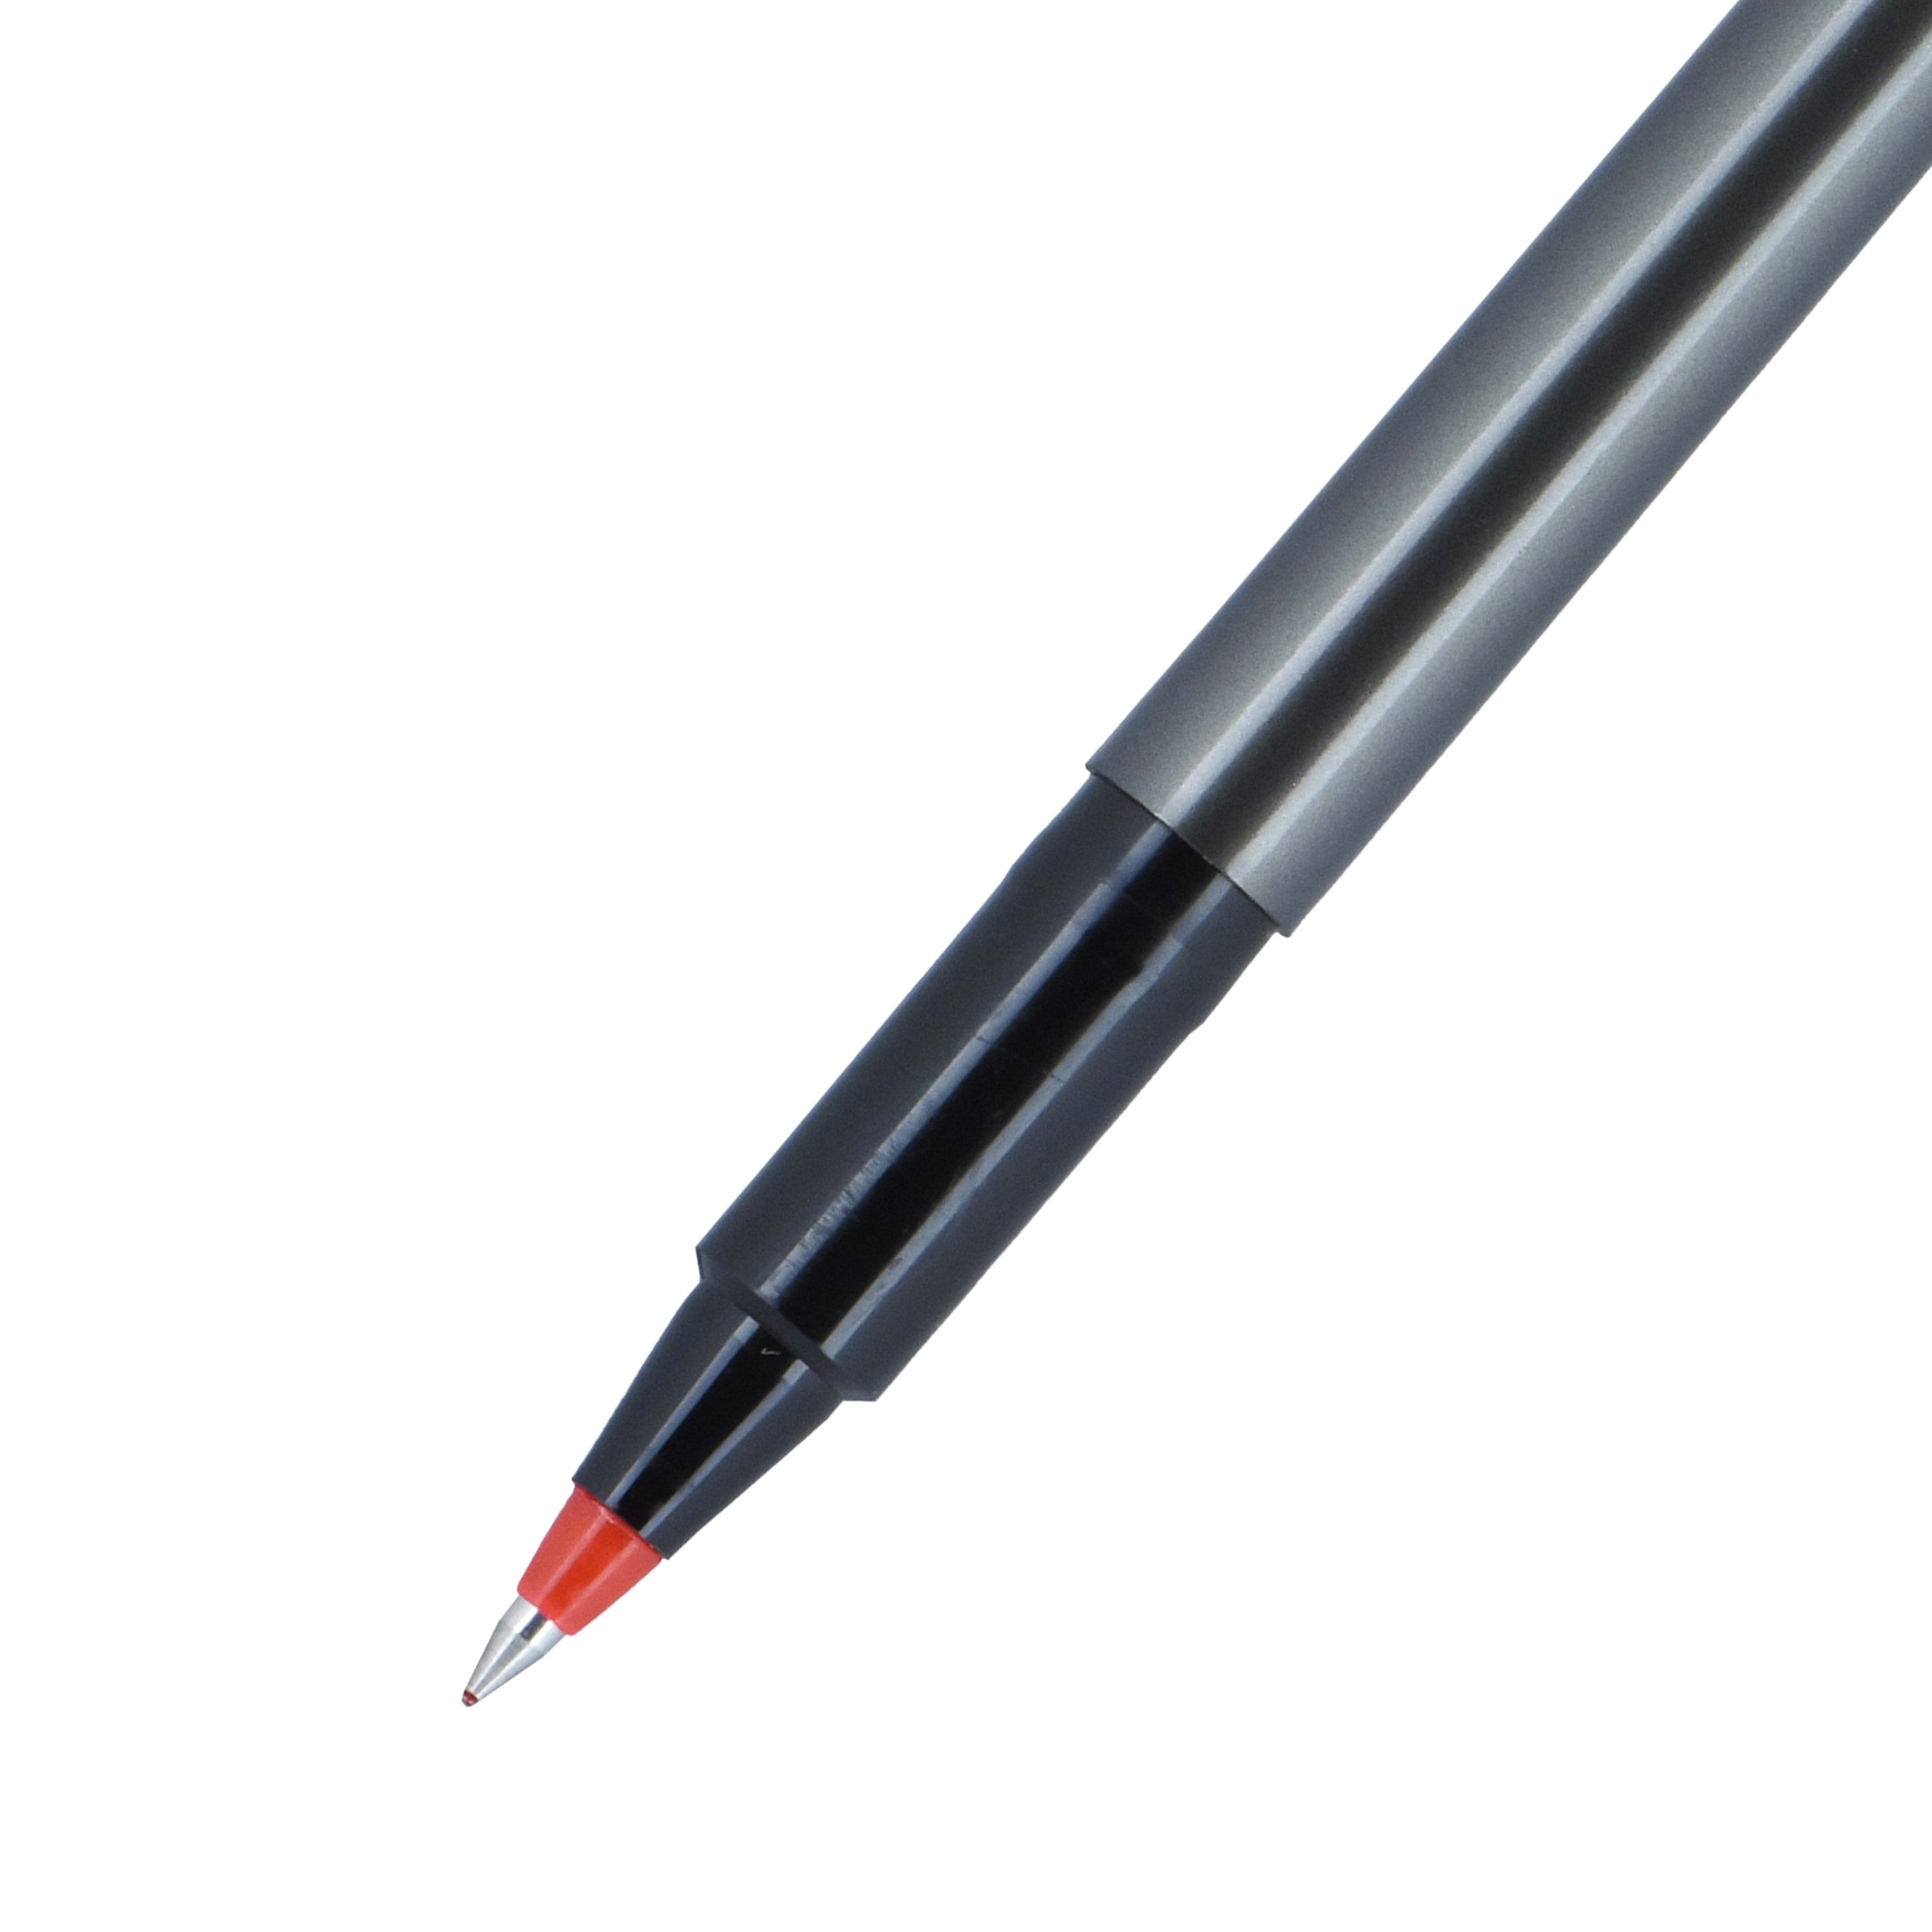 uni-ball Deluxe Roller Ball Stick Waterproof Pen, Red Ink, Micro